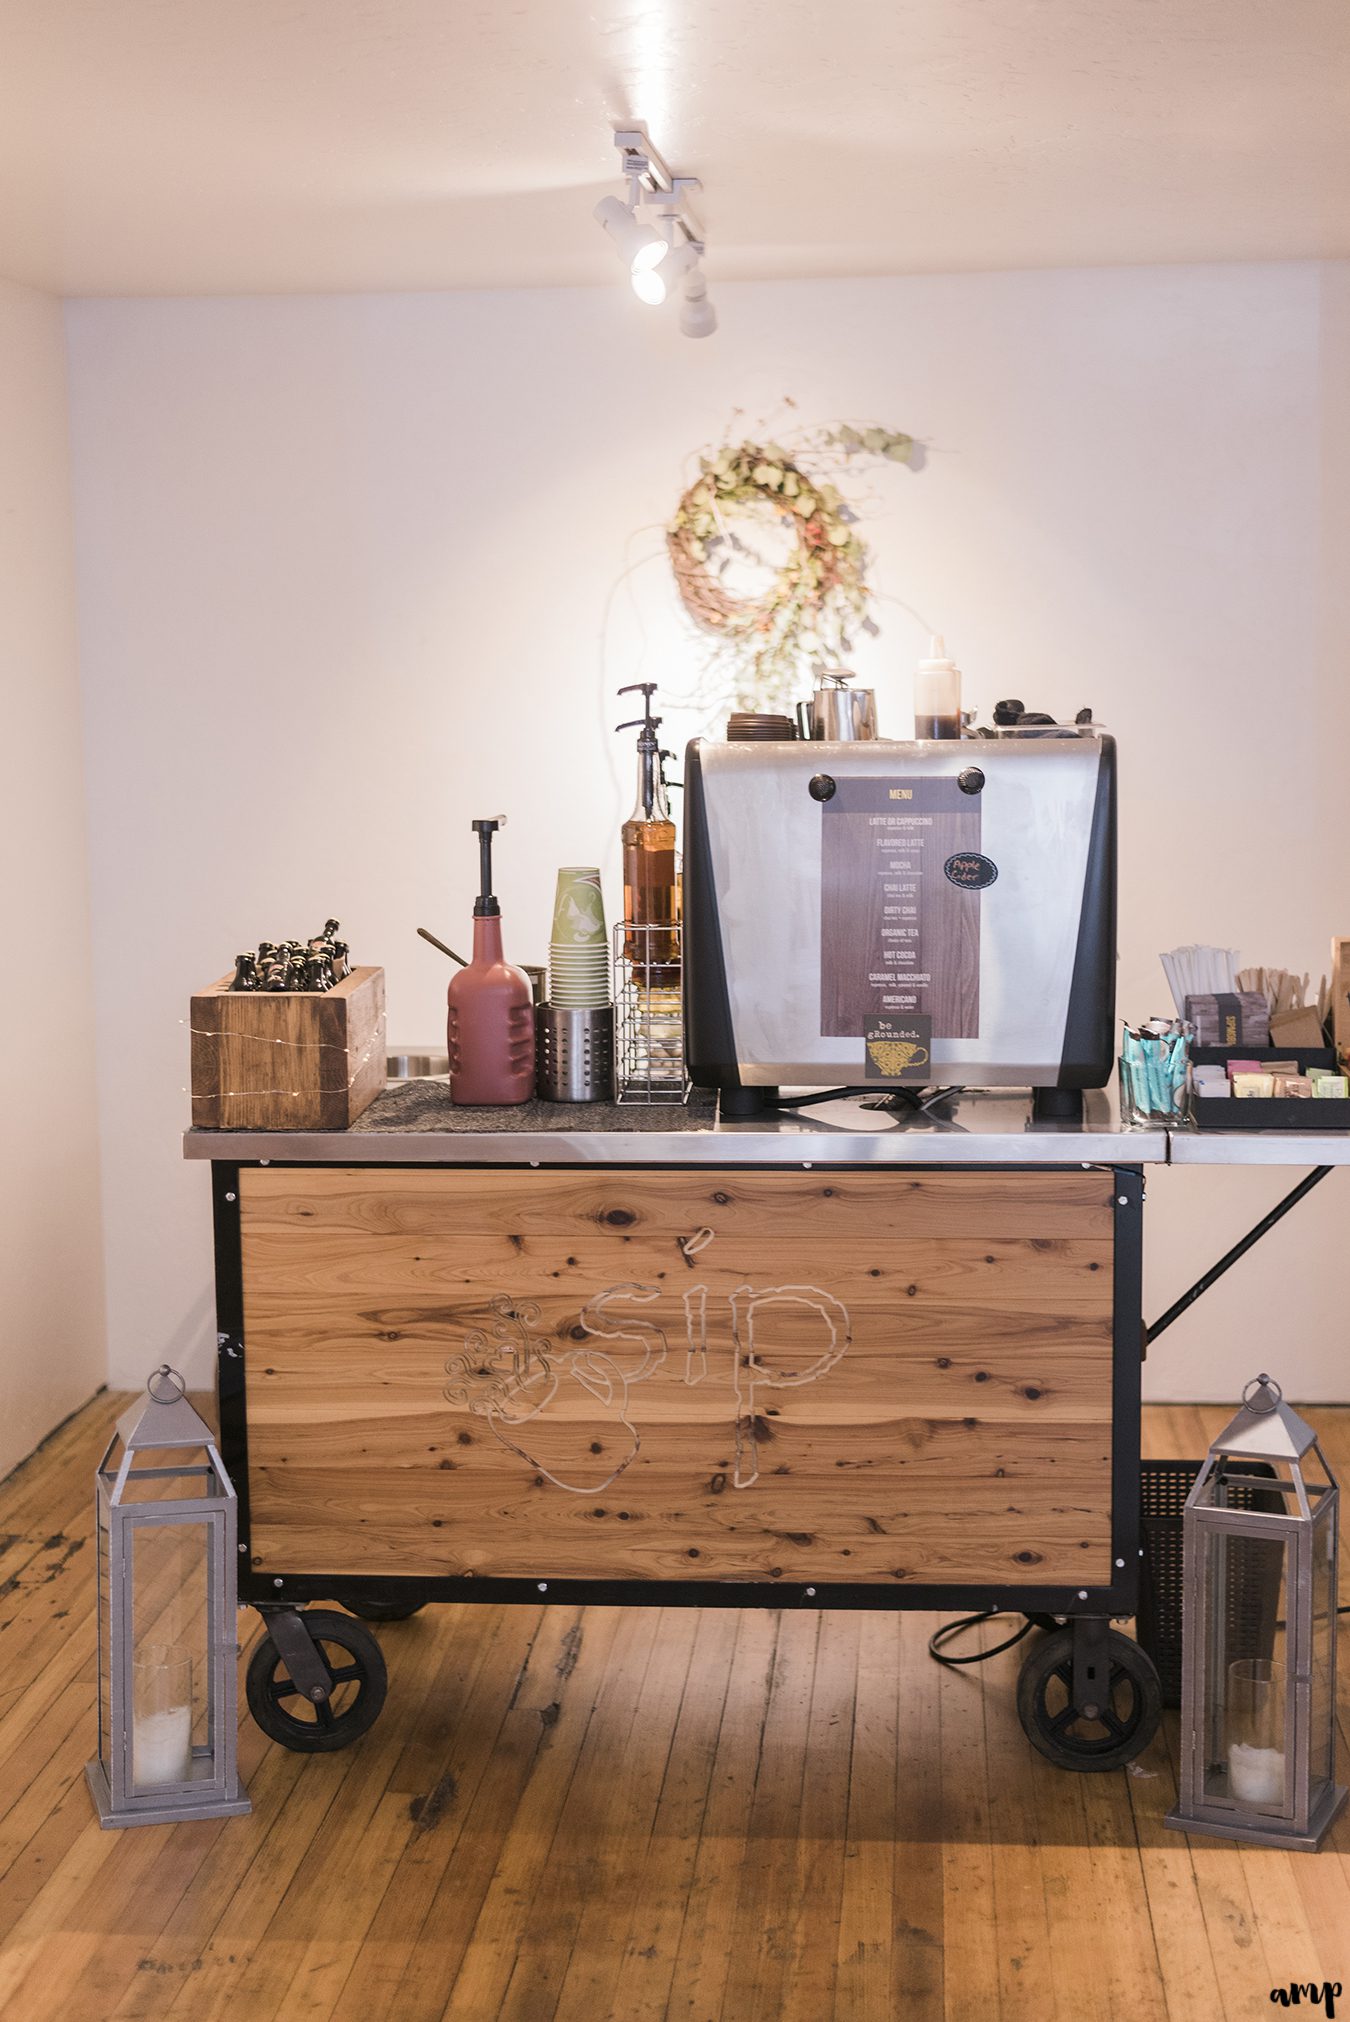 Sip Mobile coffee cart at Pineapple Place